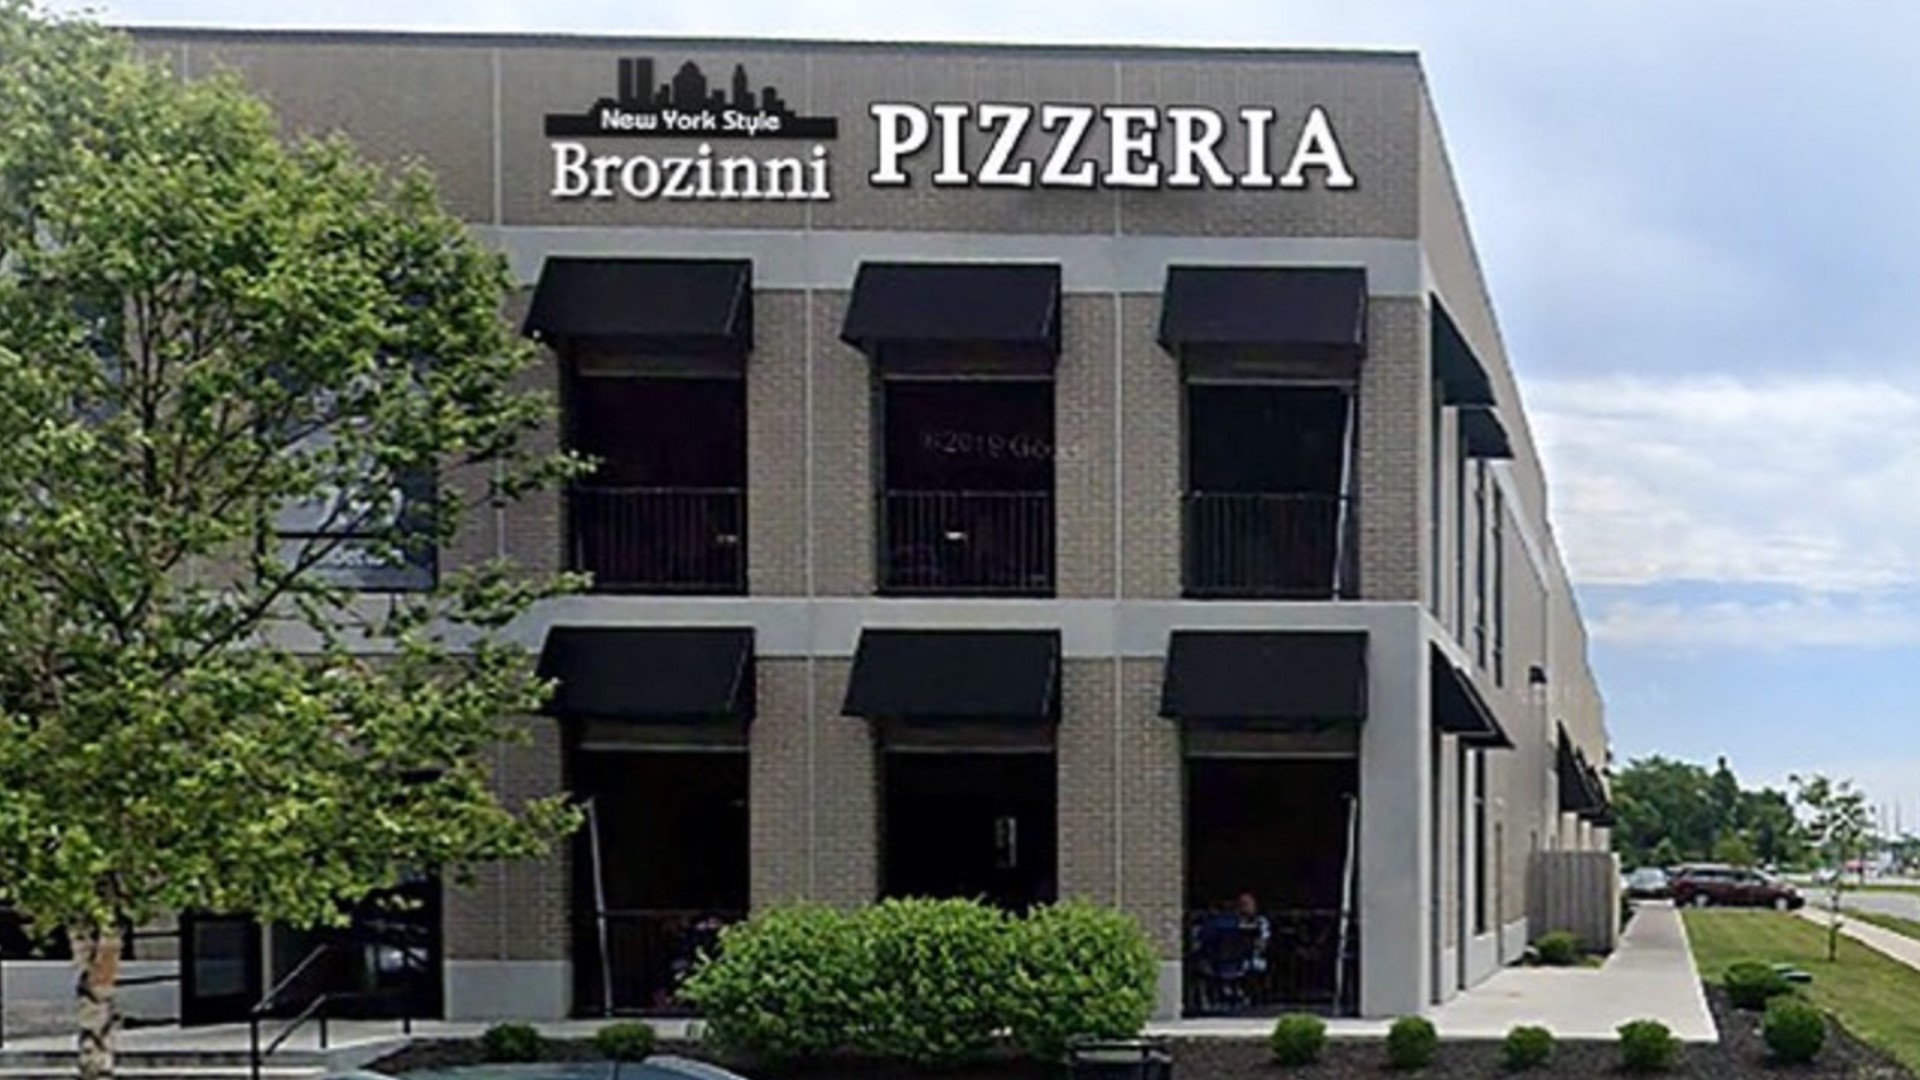 The New York-style pizza place will open its new location inside the Speedway Indoor Karting building.